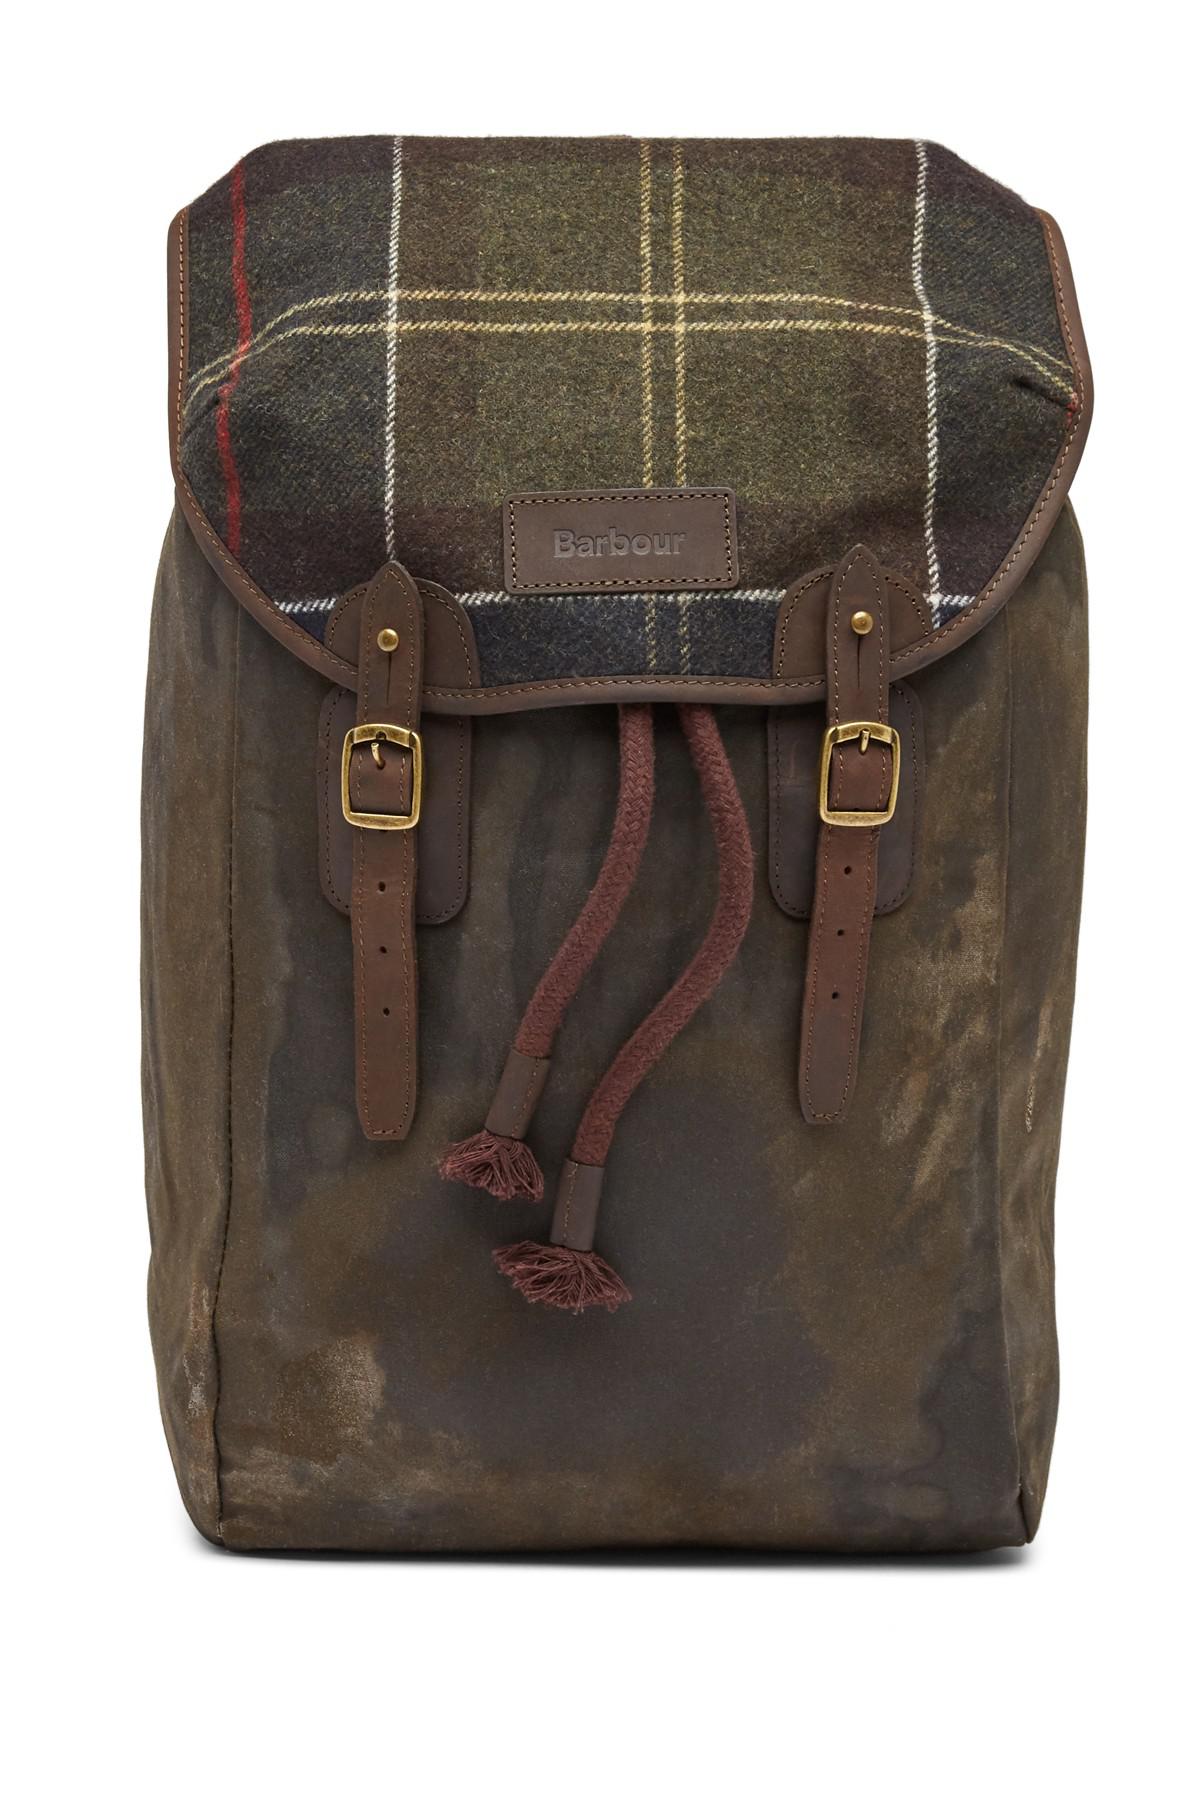 Barbour Leather Backpack on Sale, SAVE 56%.